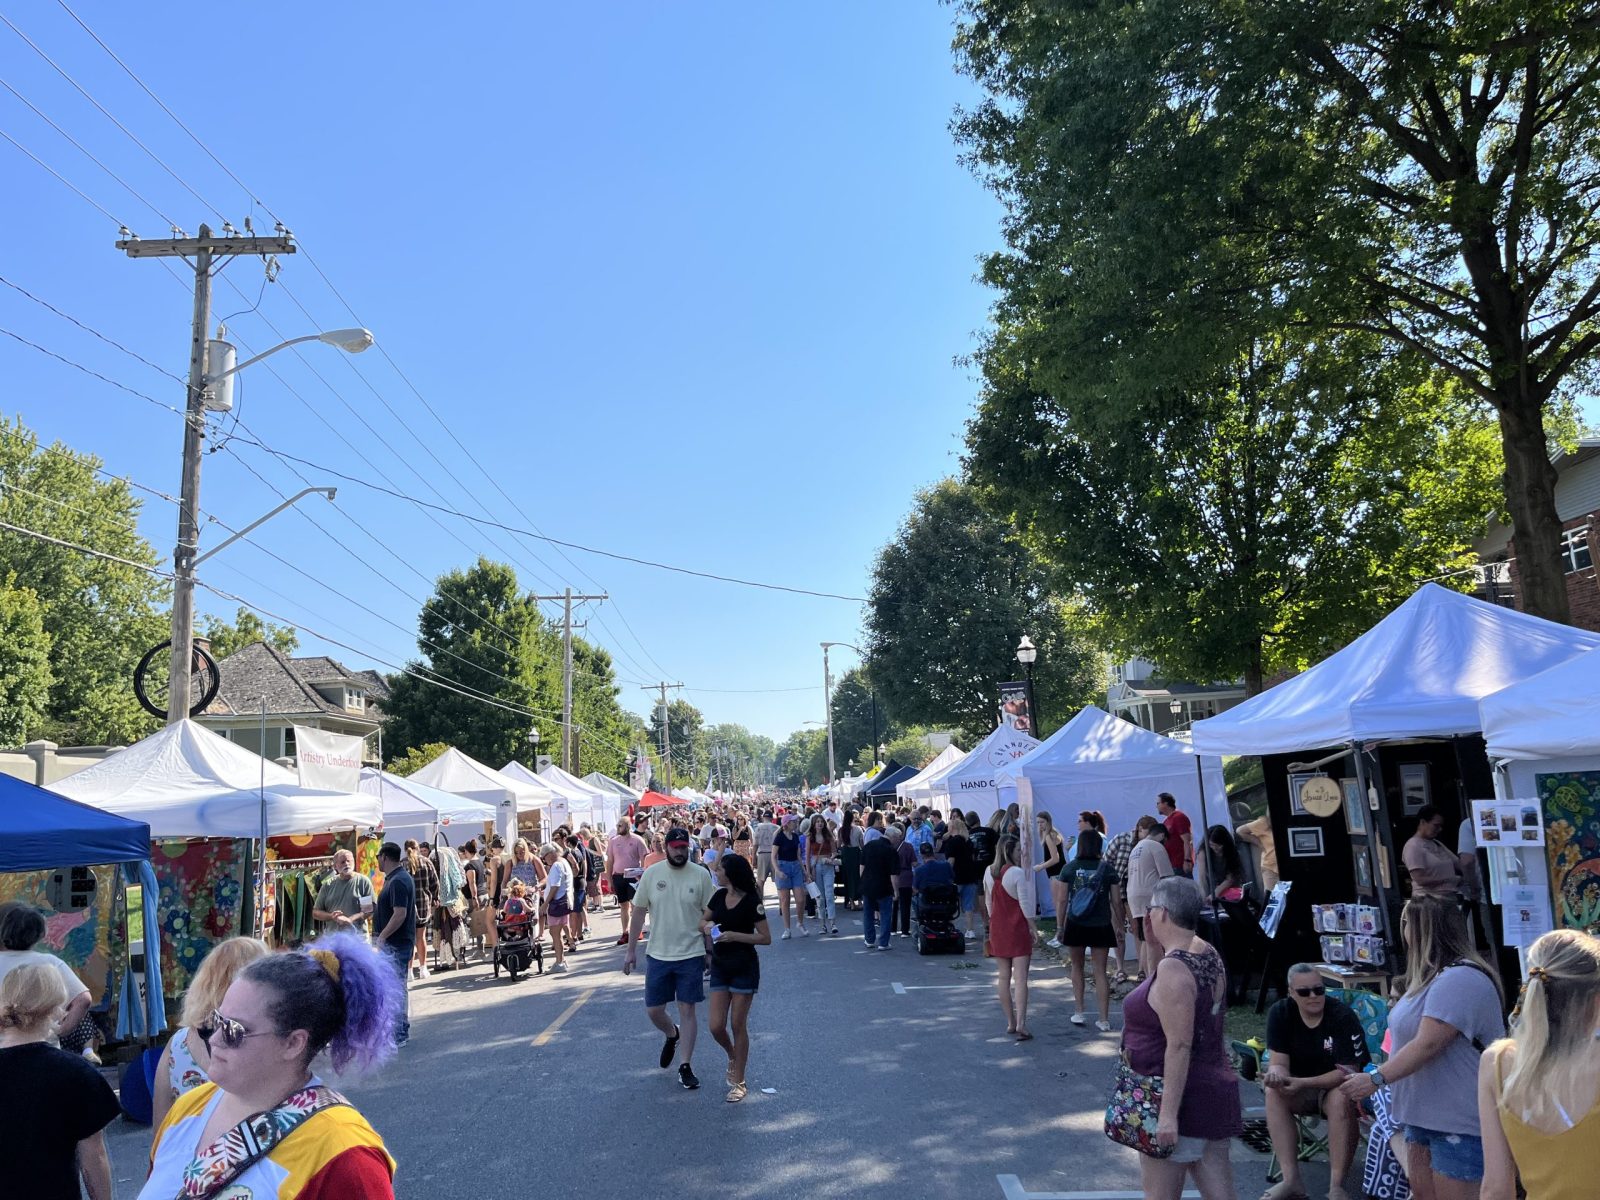 Crowds browse tents along Historic Walnut Street during Cider Days